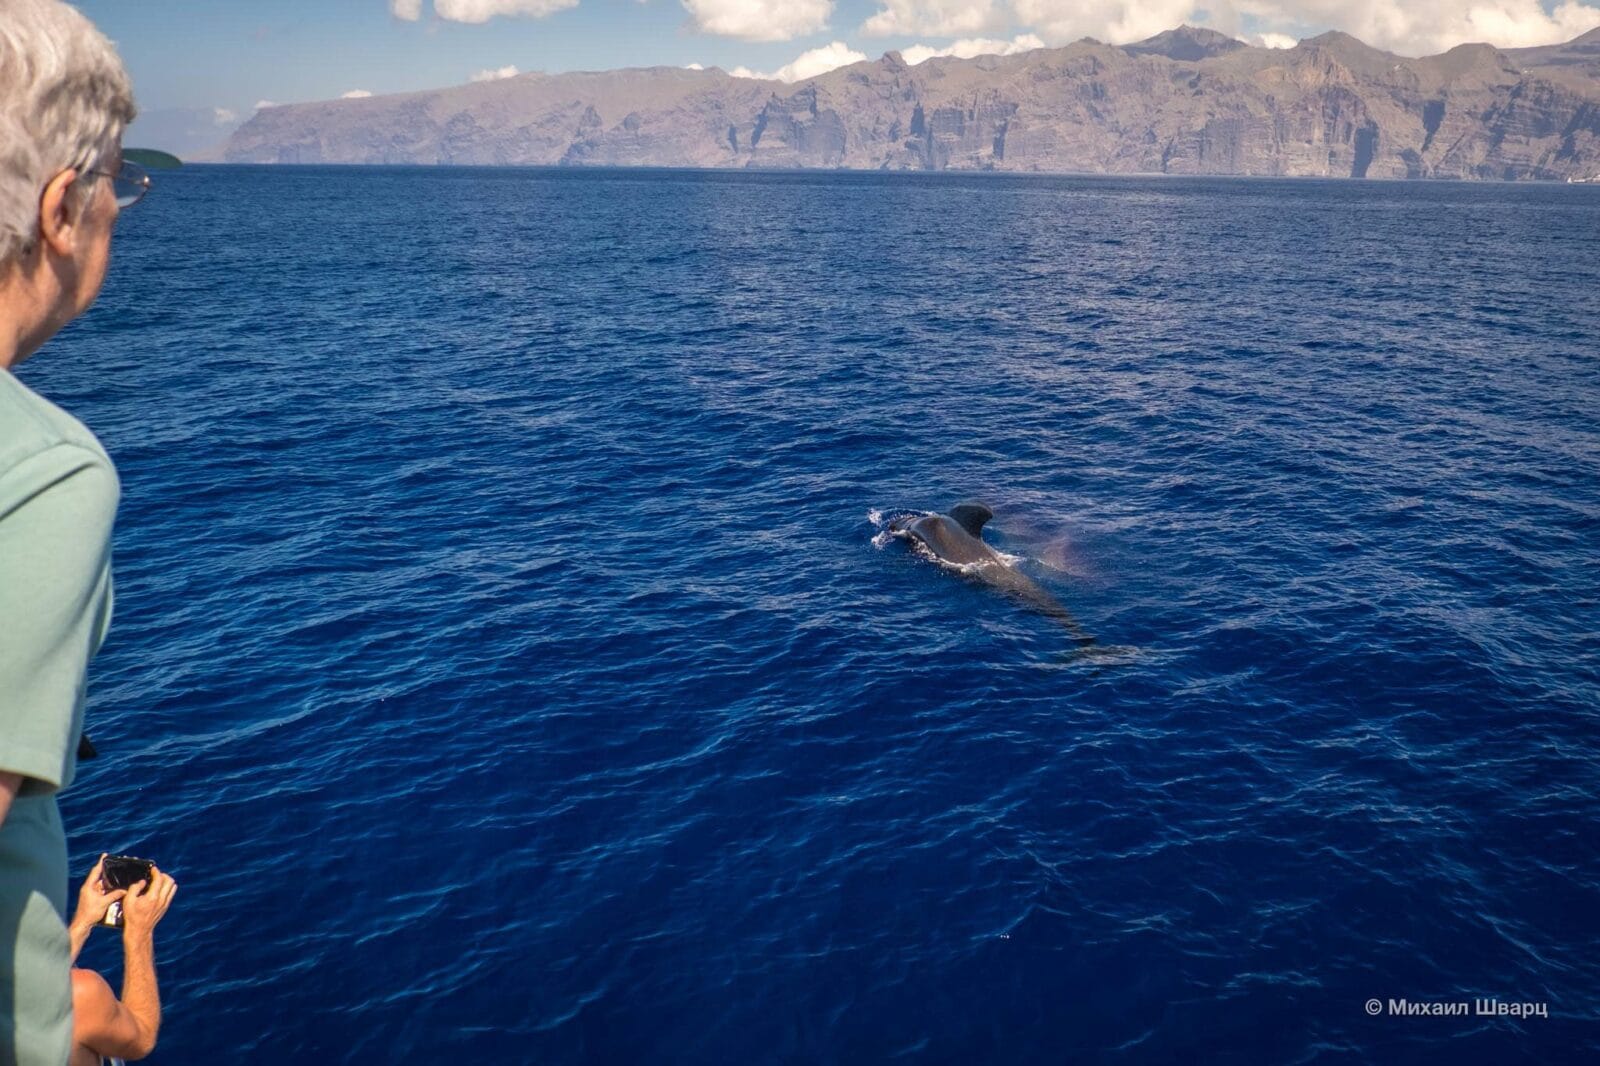 Whale watching is one of the most popular activities in Tenerife